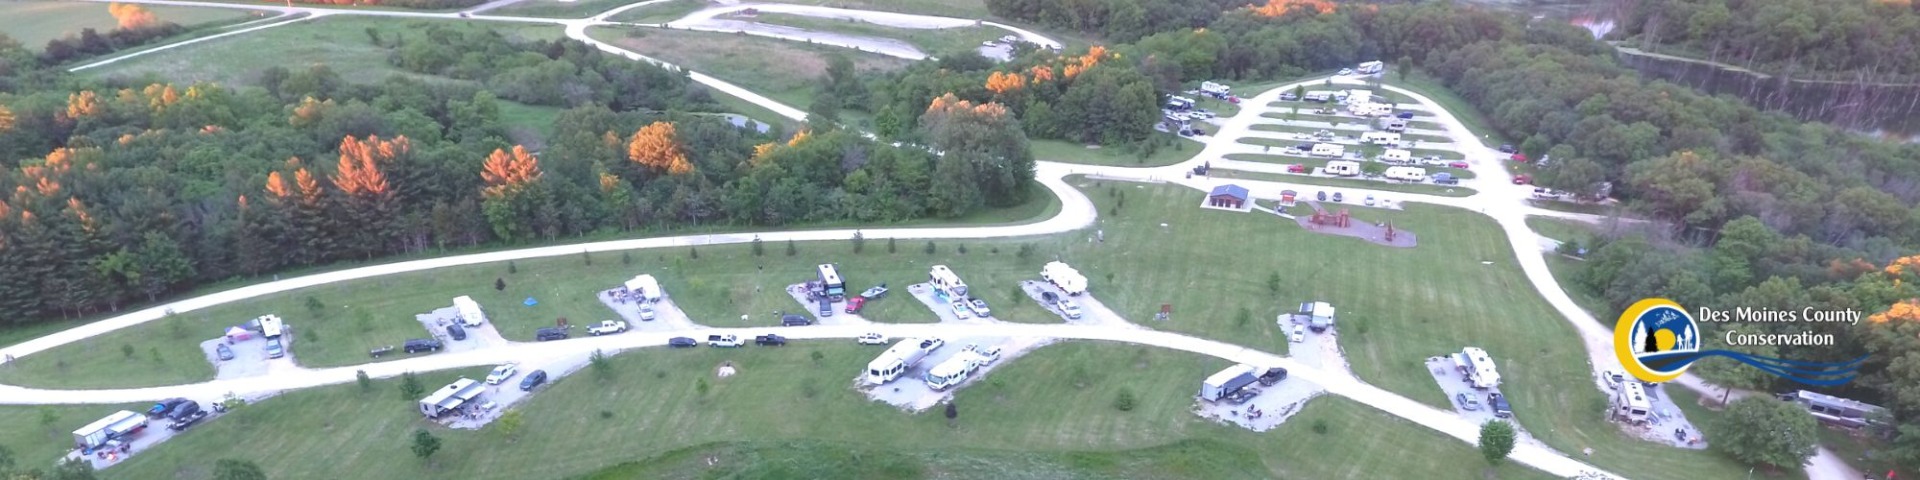 Aerial image of Big Hollow campground